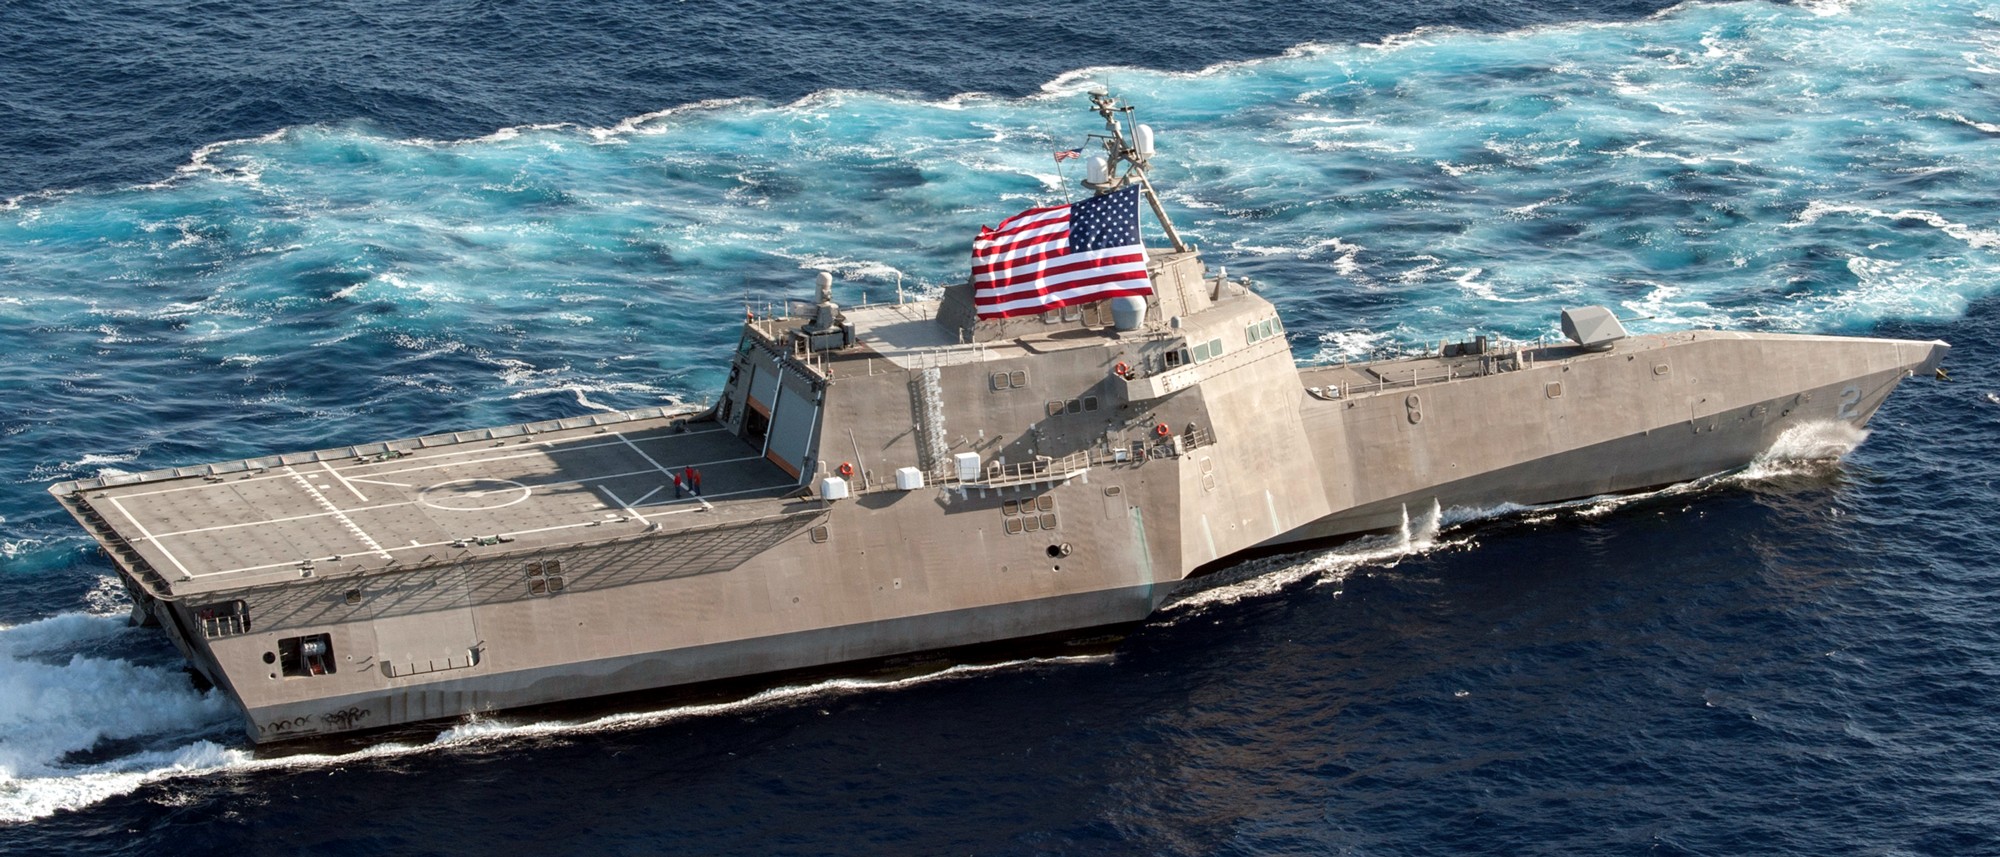 lcs-2 uss independence littoral combat ship us navy class 18